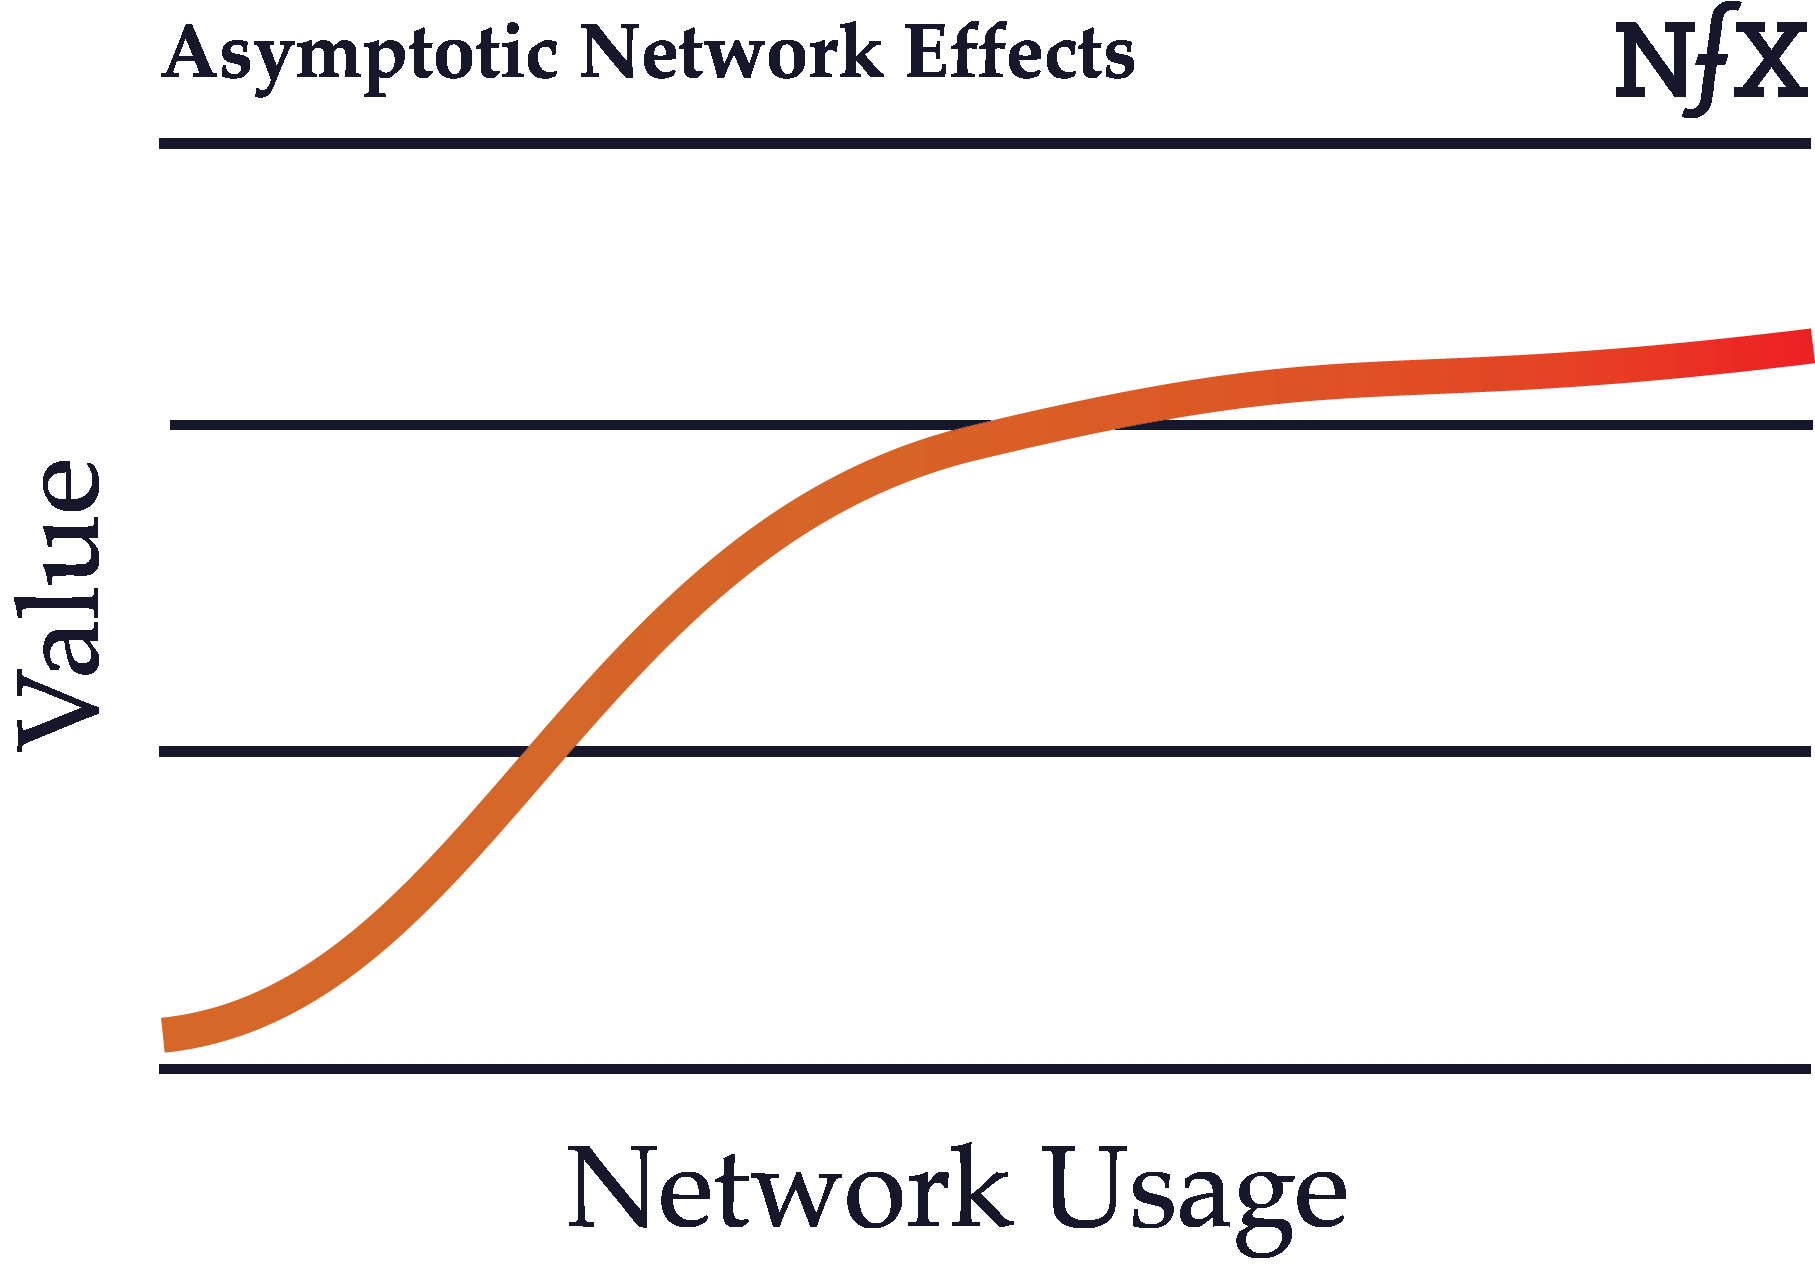 Asymptotic Network Effects